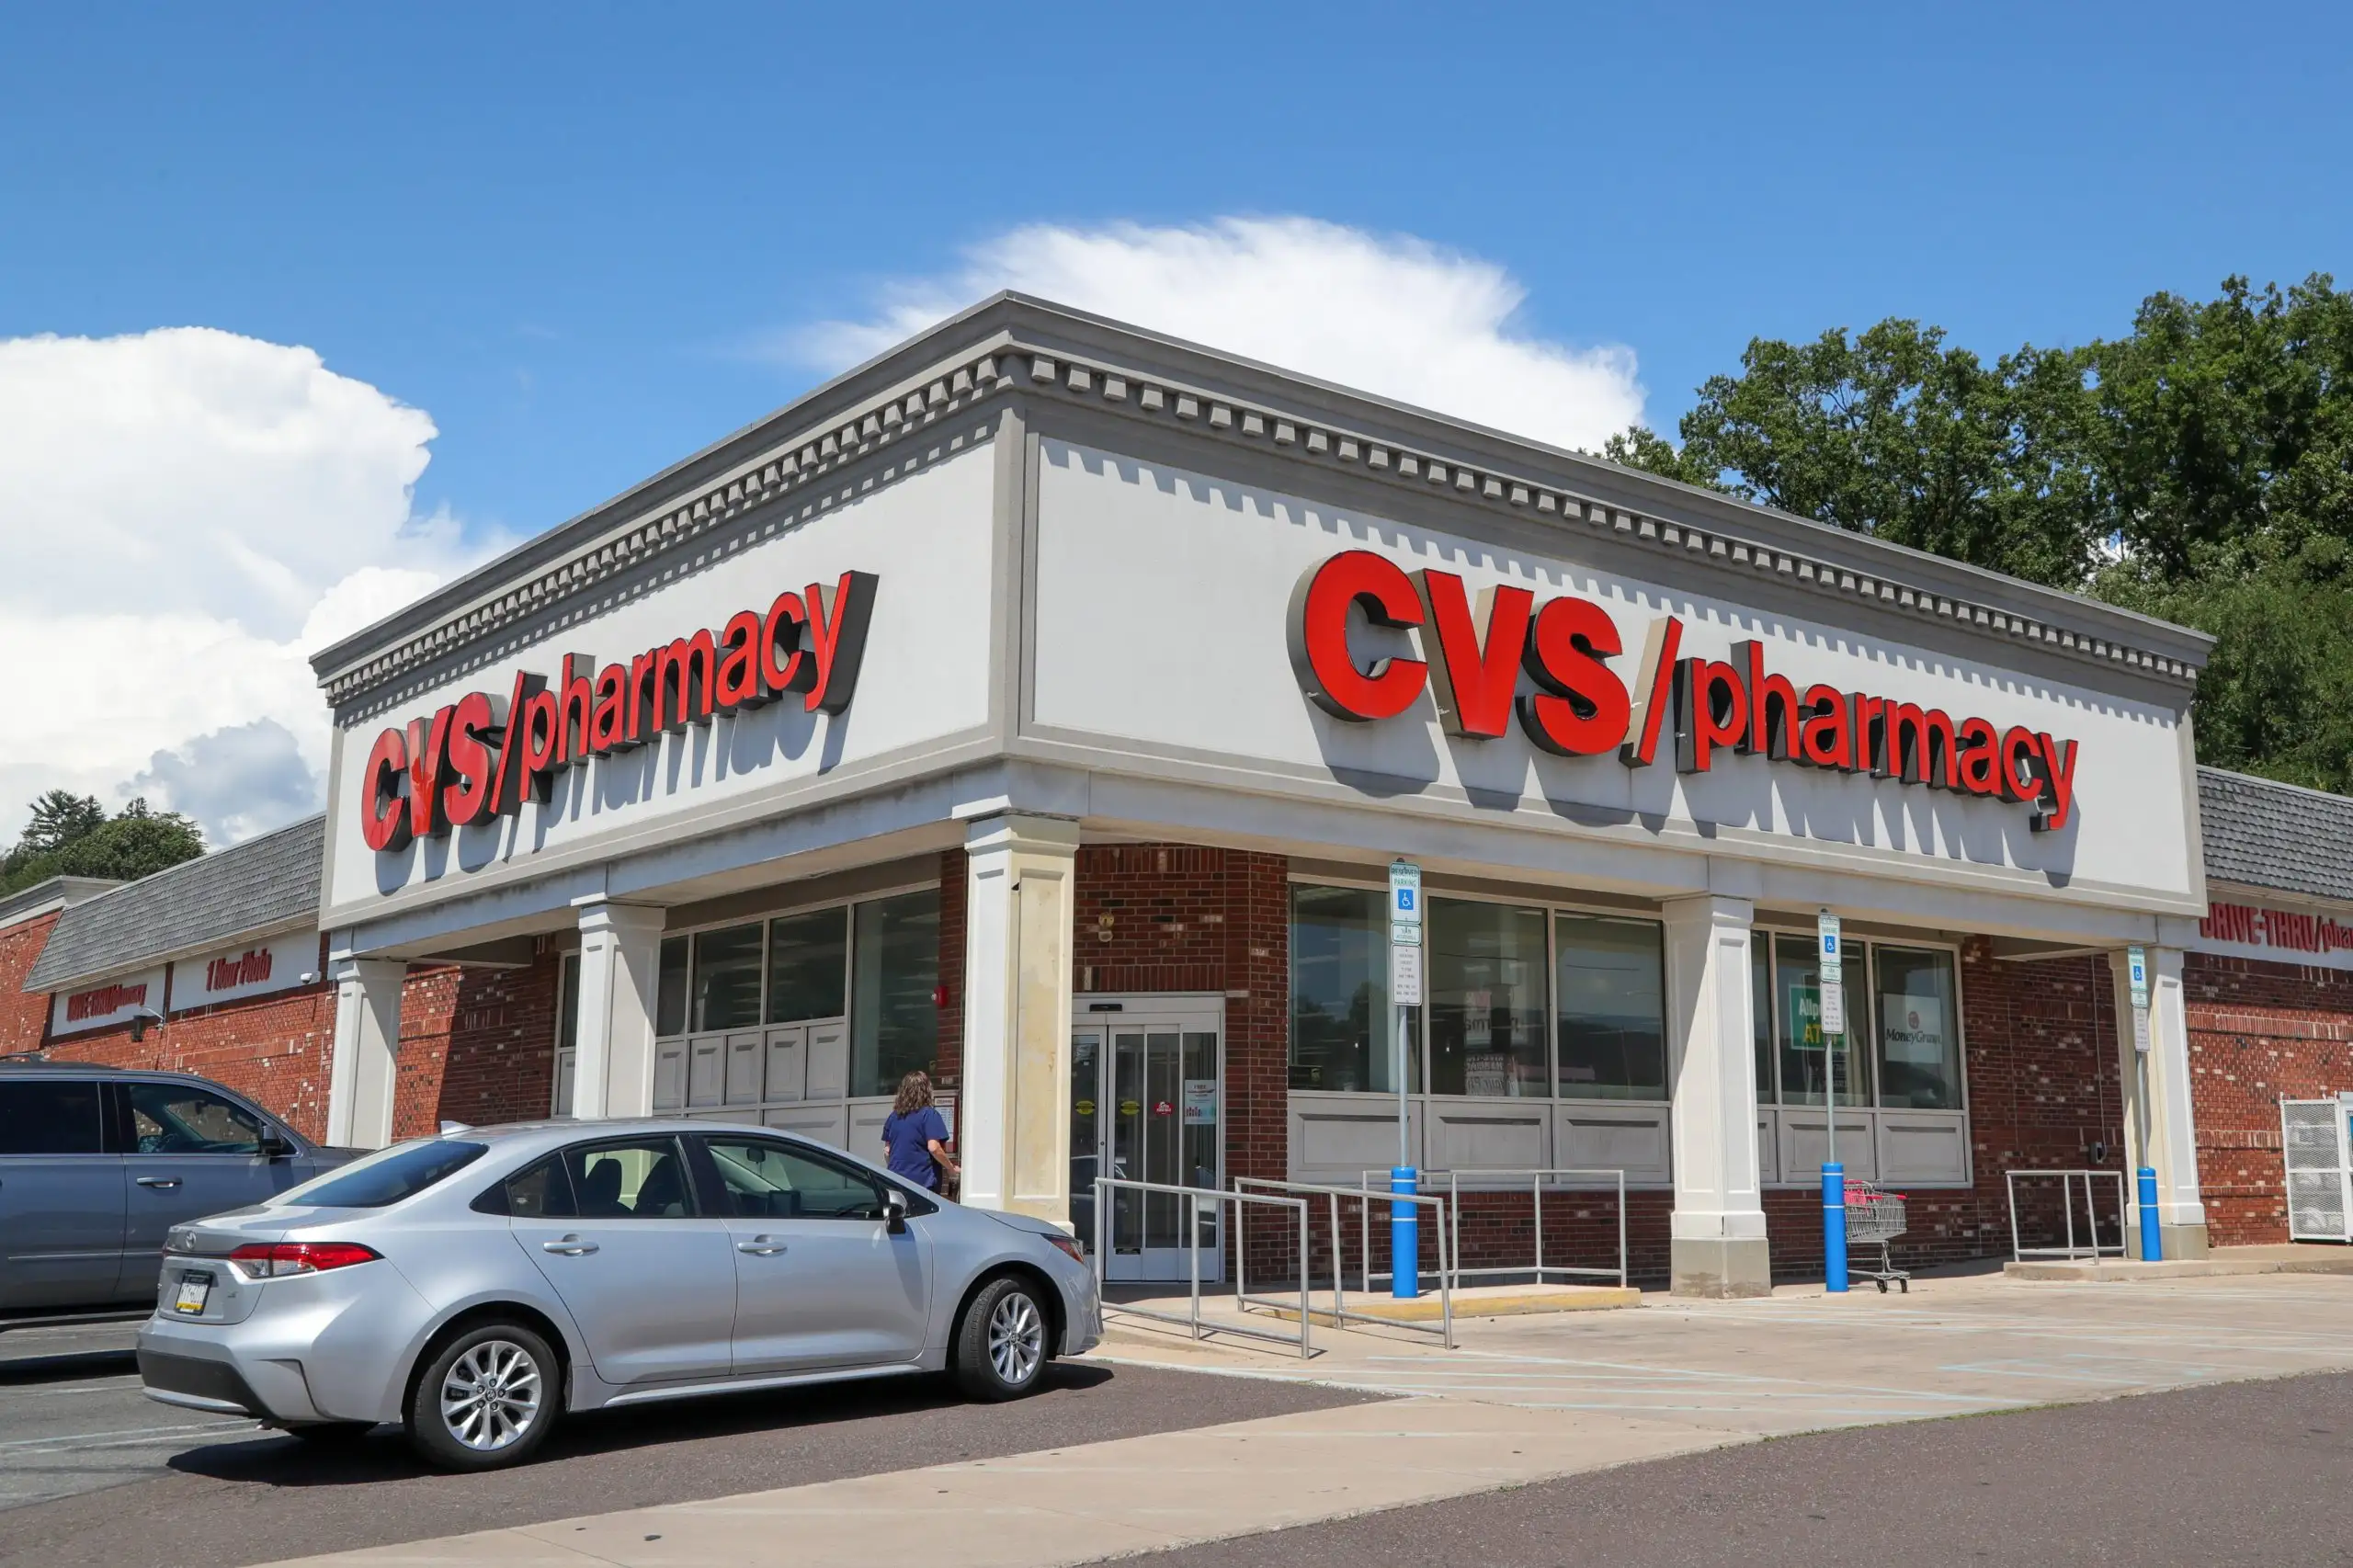 The next era of CVS is all about services